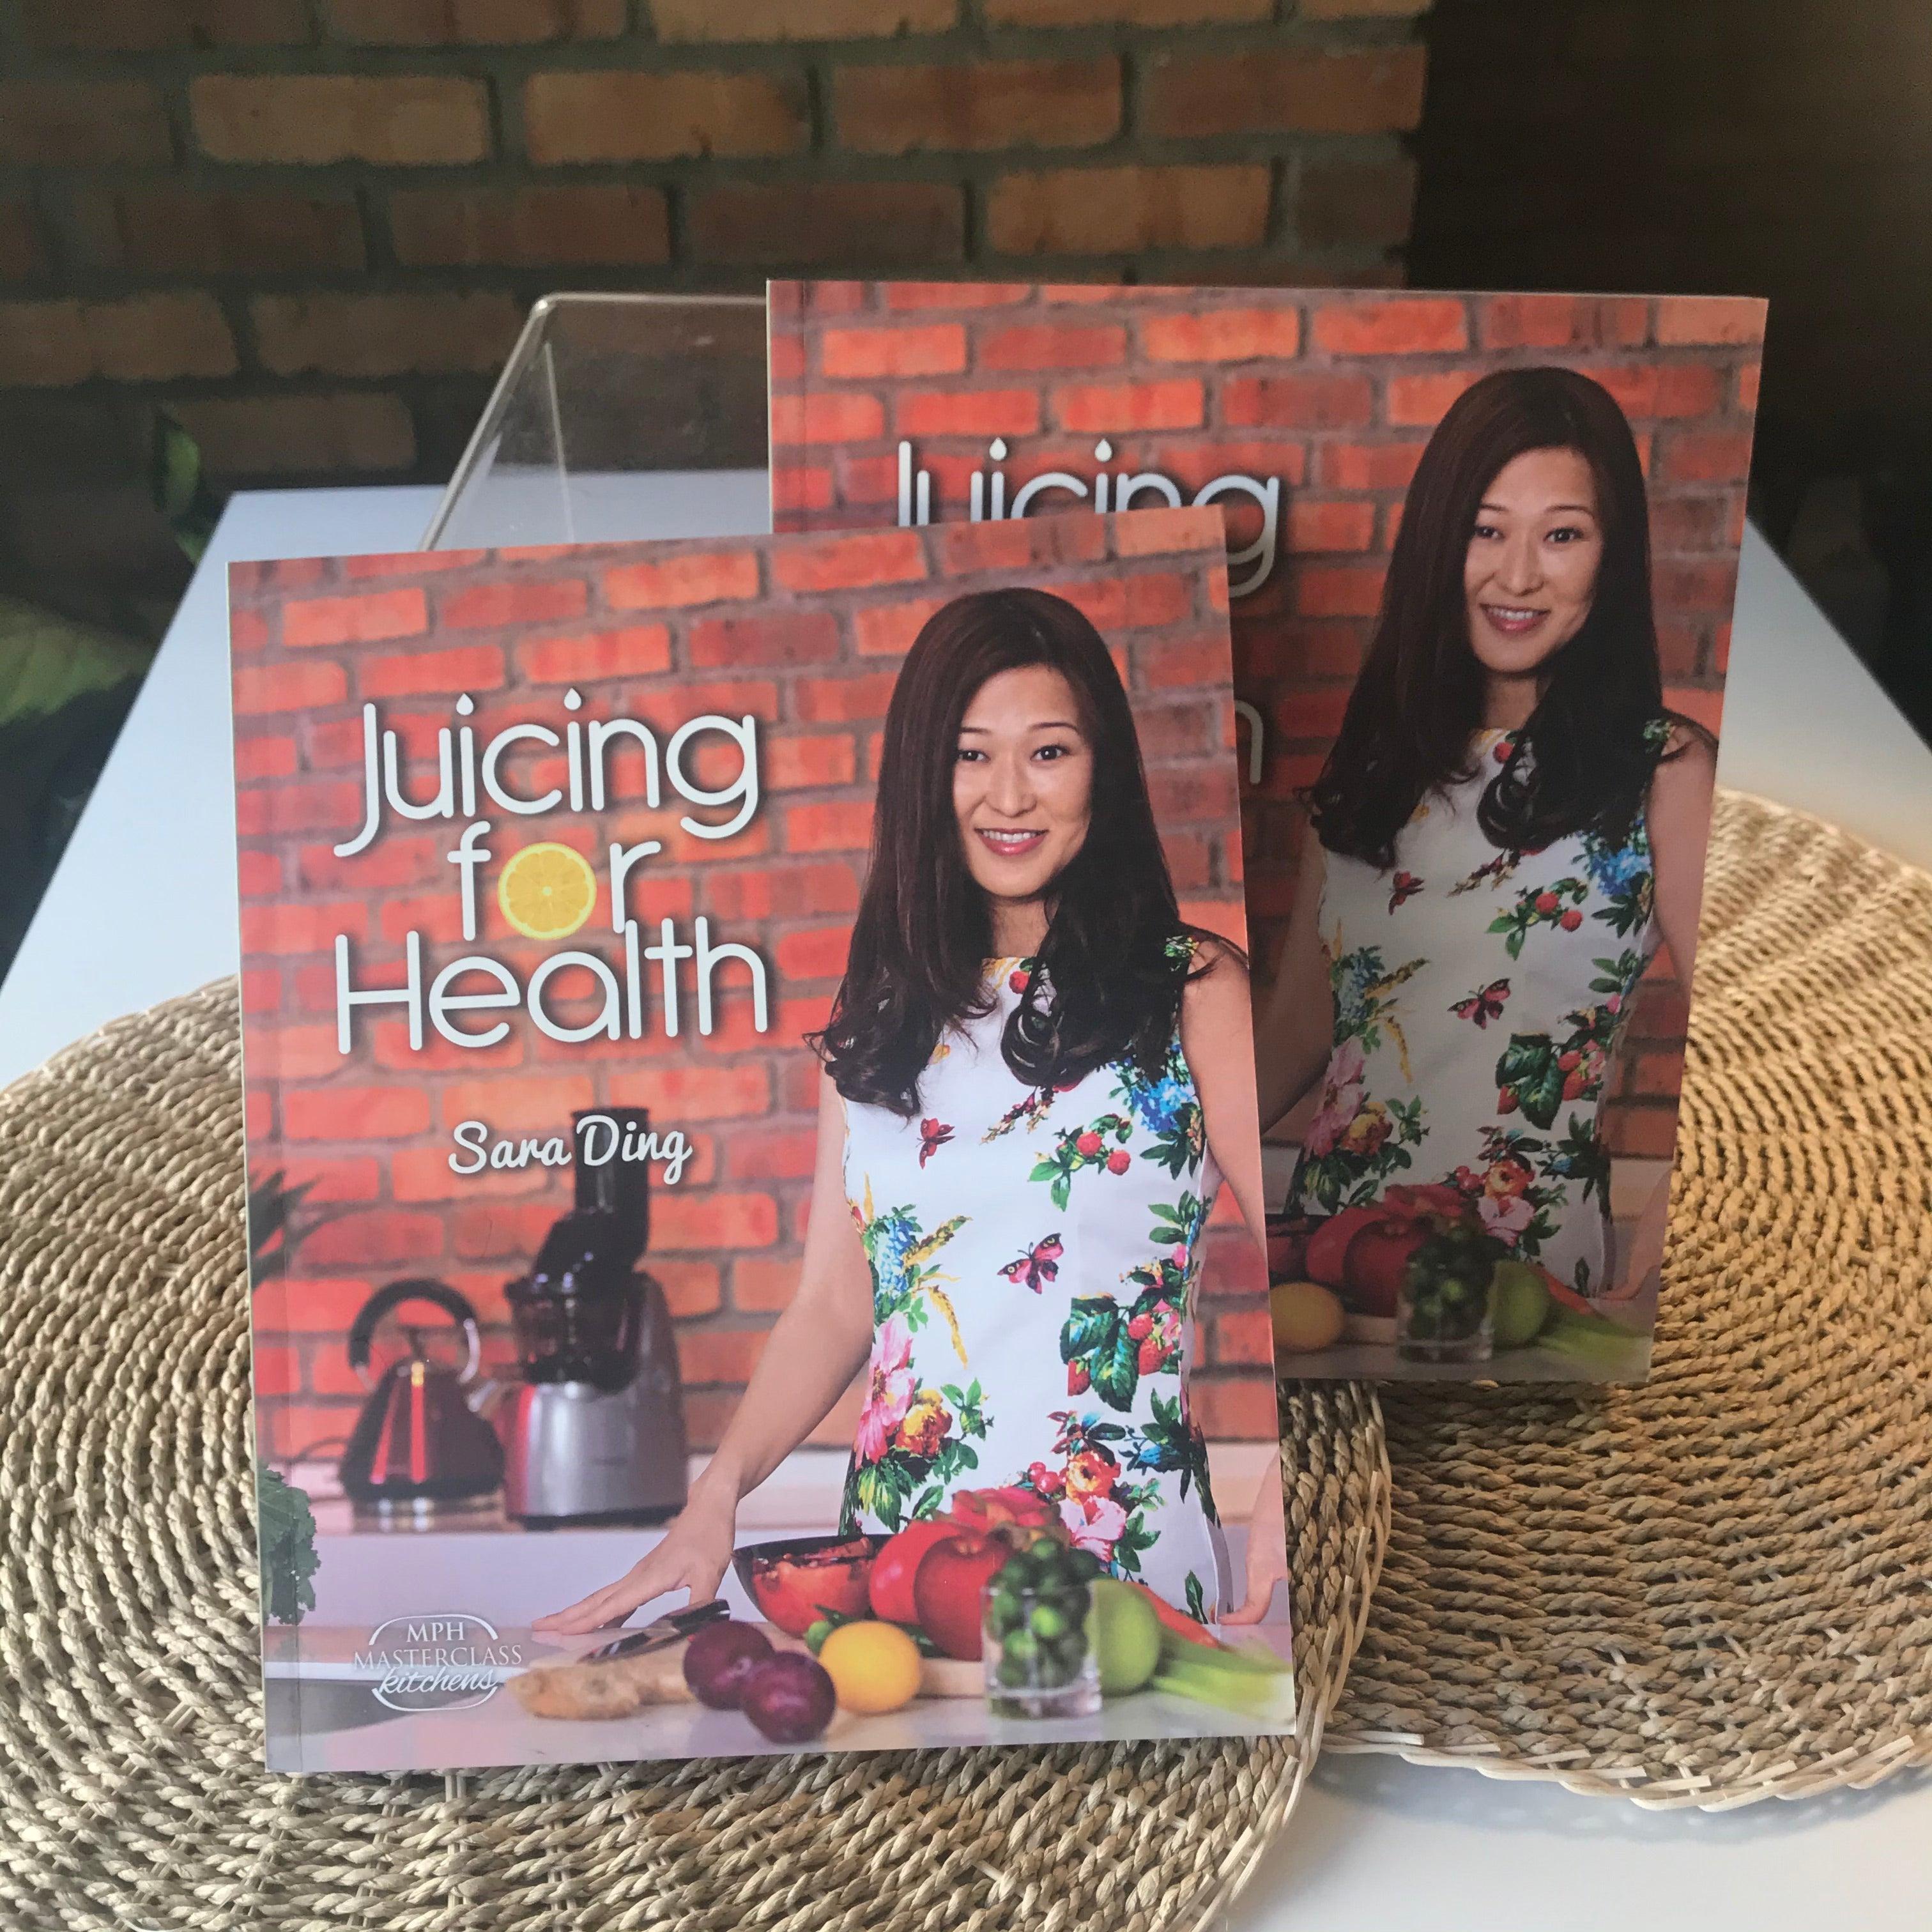 Sara Ding Juicing for Health Recipe Book - Kuvings.my